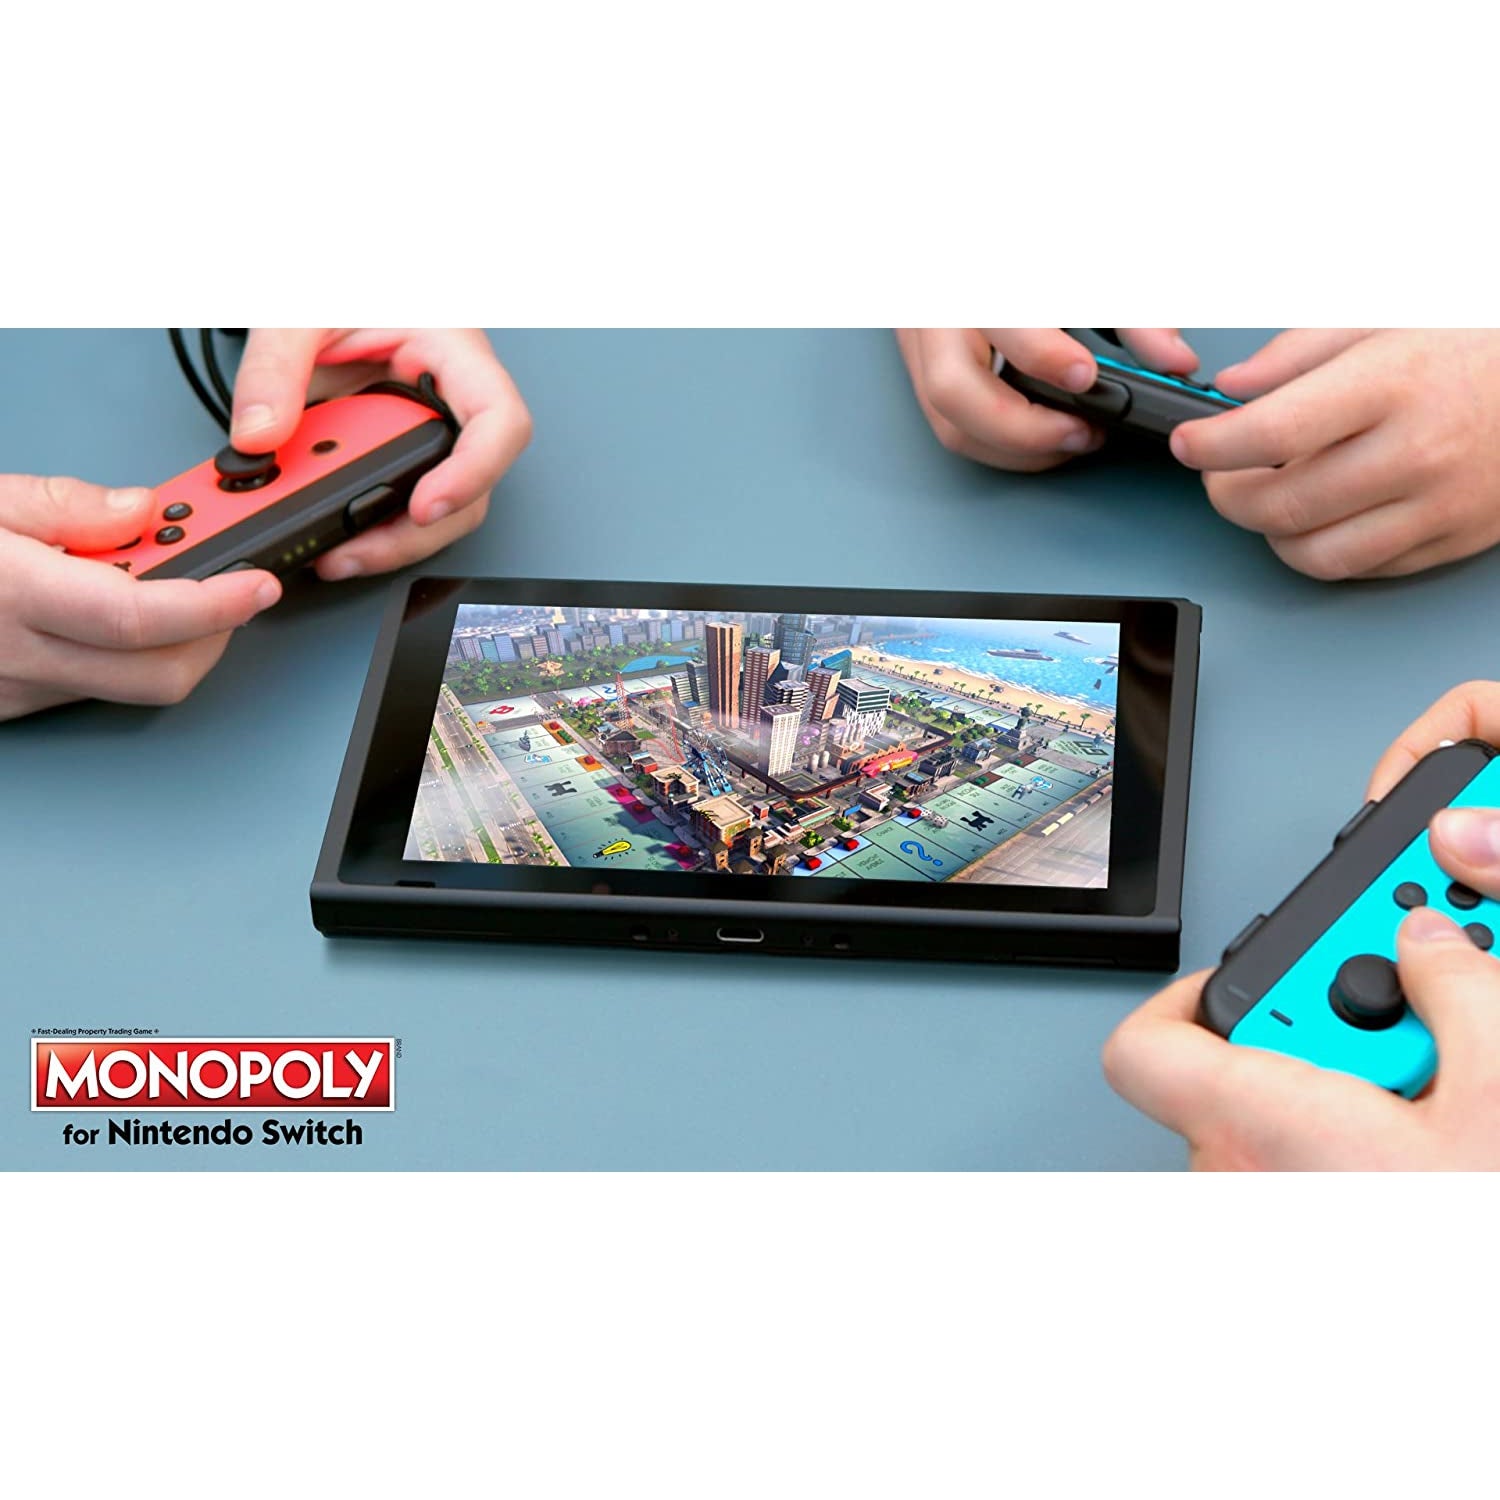 Monopoly (Nintendo Switch) Video Game